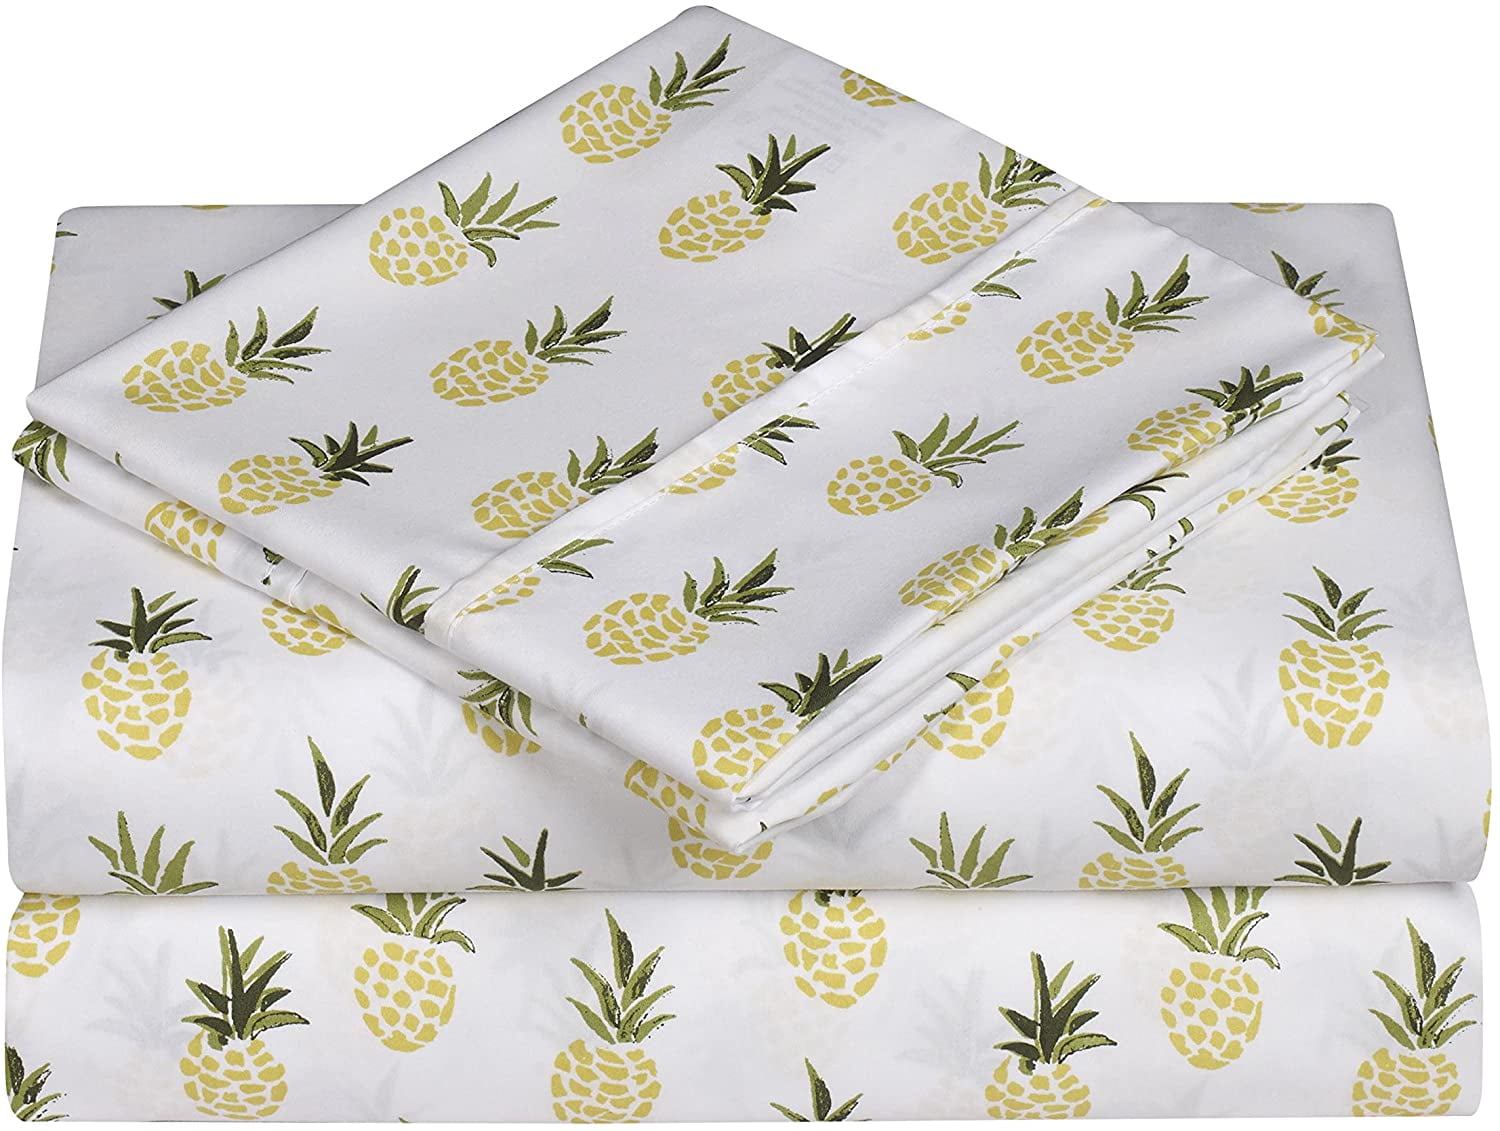 Elegant Comfort Soft Bed Sheets Pineapple Pattern 1500 Thread Count Percale  Egyptian Quality Softness (4-Piece) Bedding Set, Twin/Twin XL, Pineapple -  Walmart.com